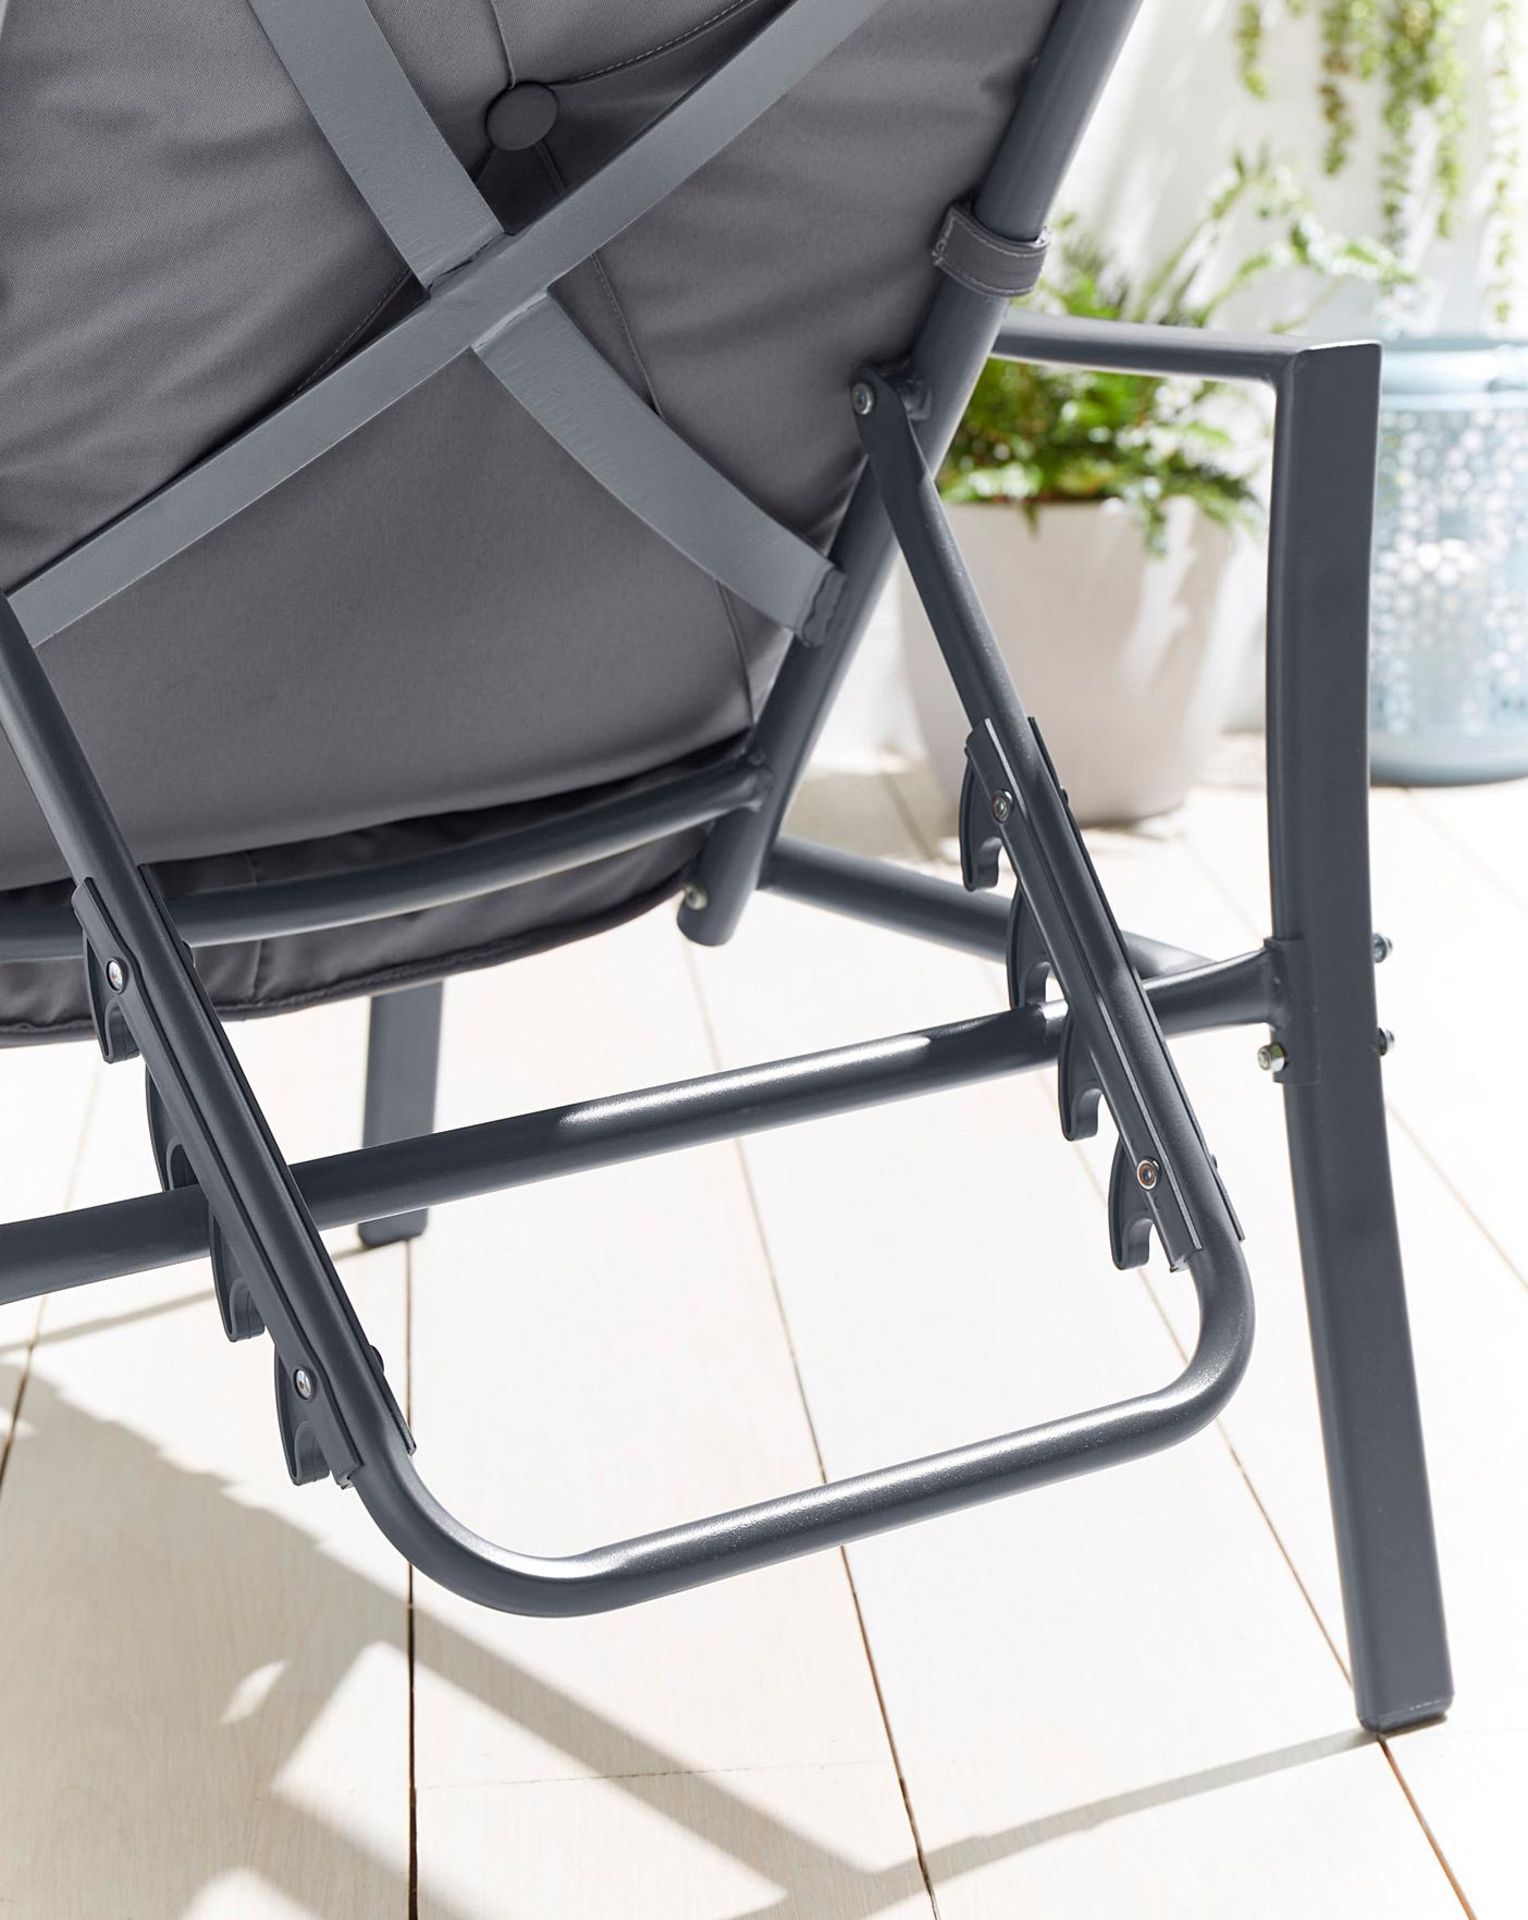 Brand New Luxury Siena Lounger. RRP £199 R18.1Siena lounger is durable and weather resistant.store - Image 4 of 4